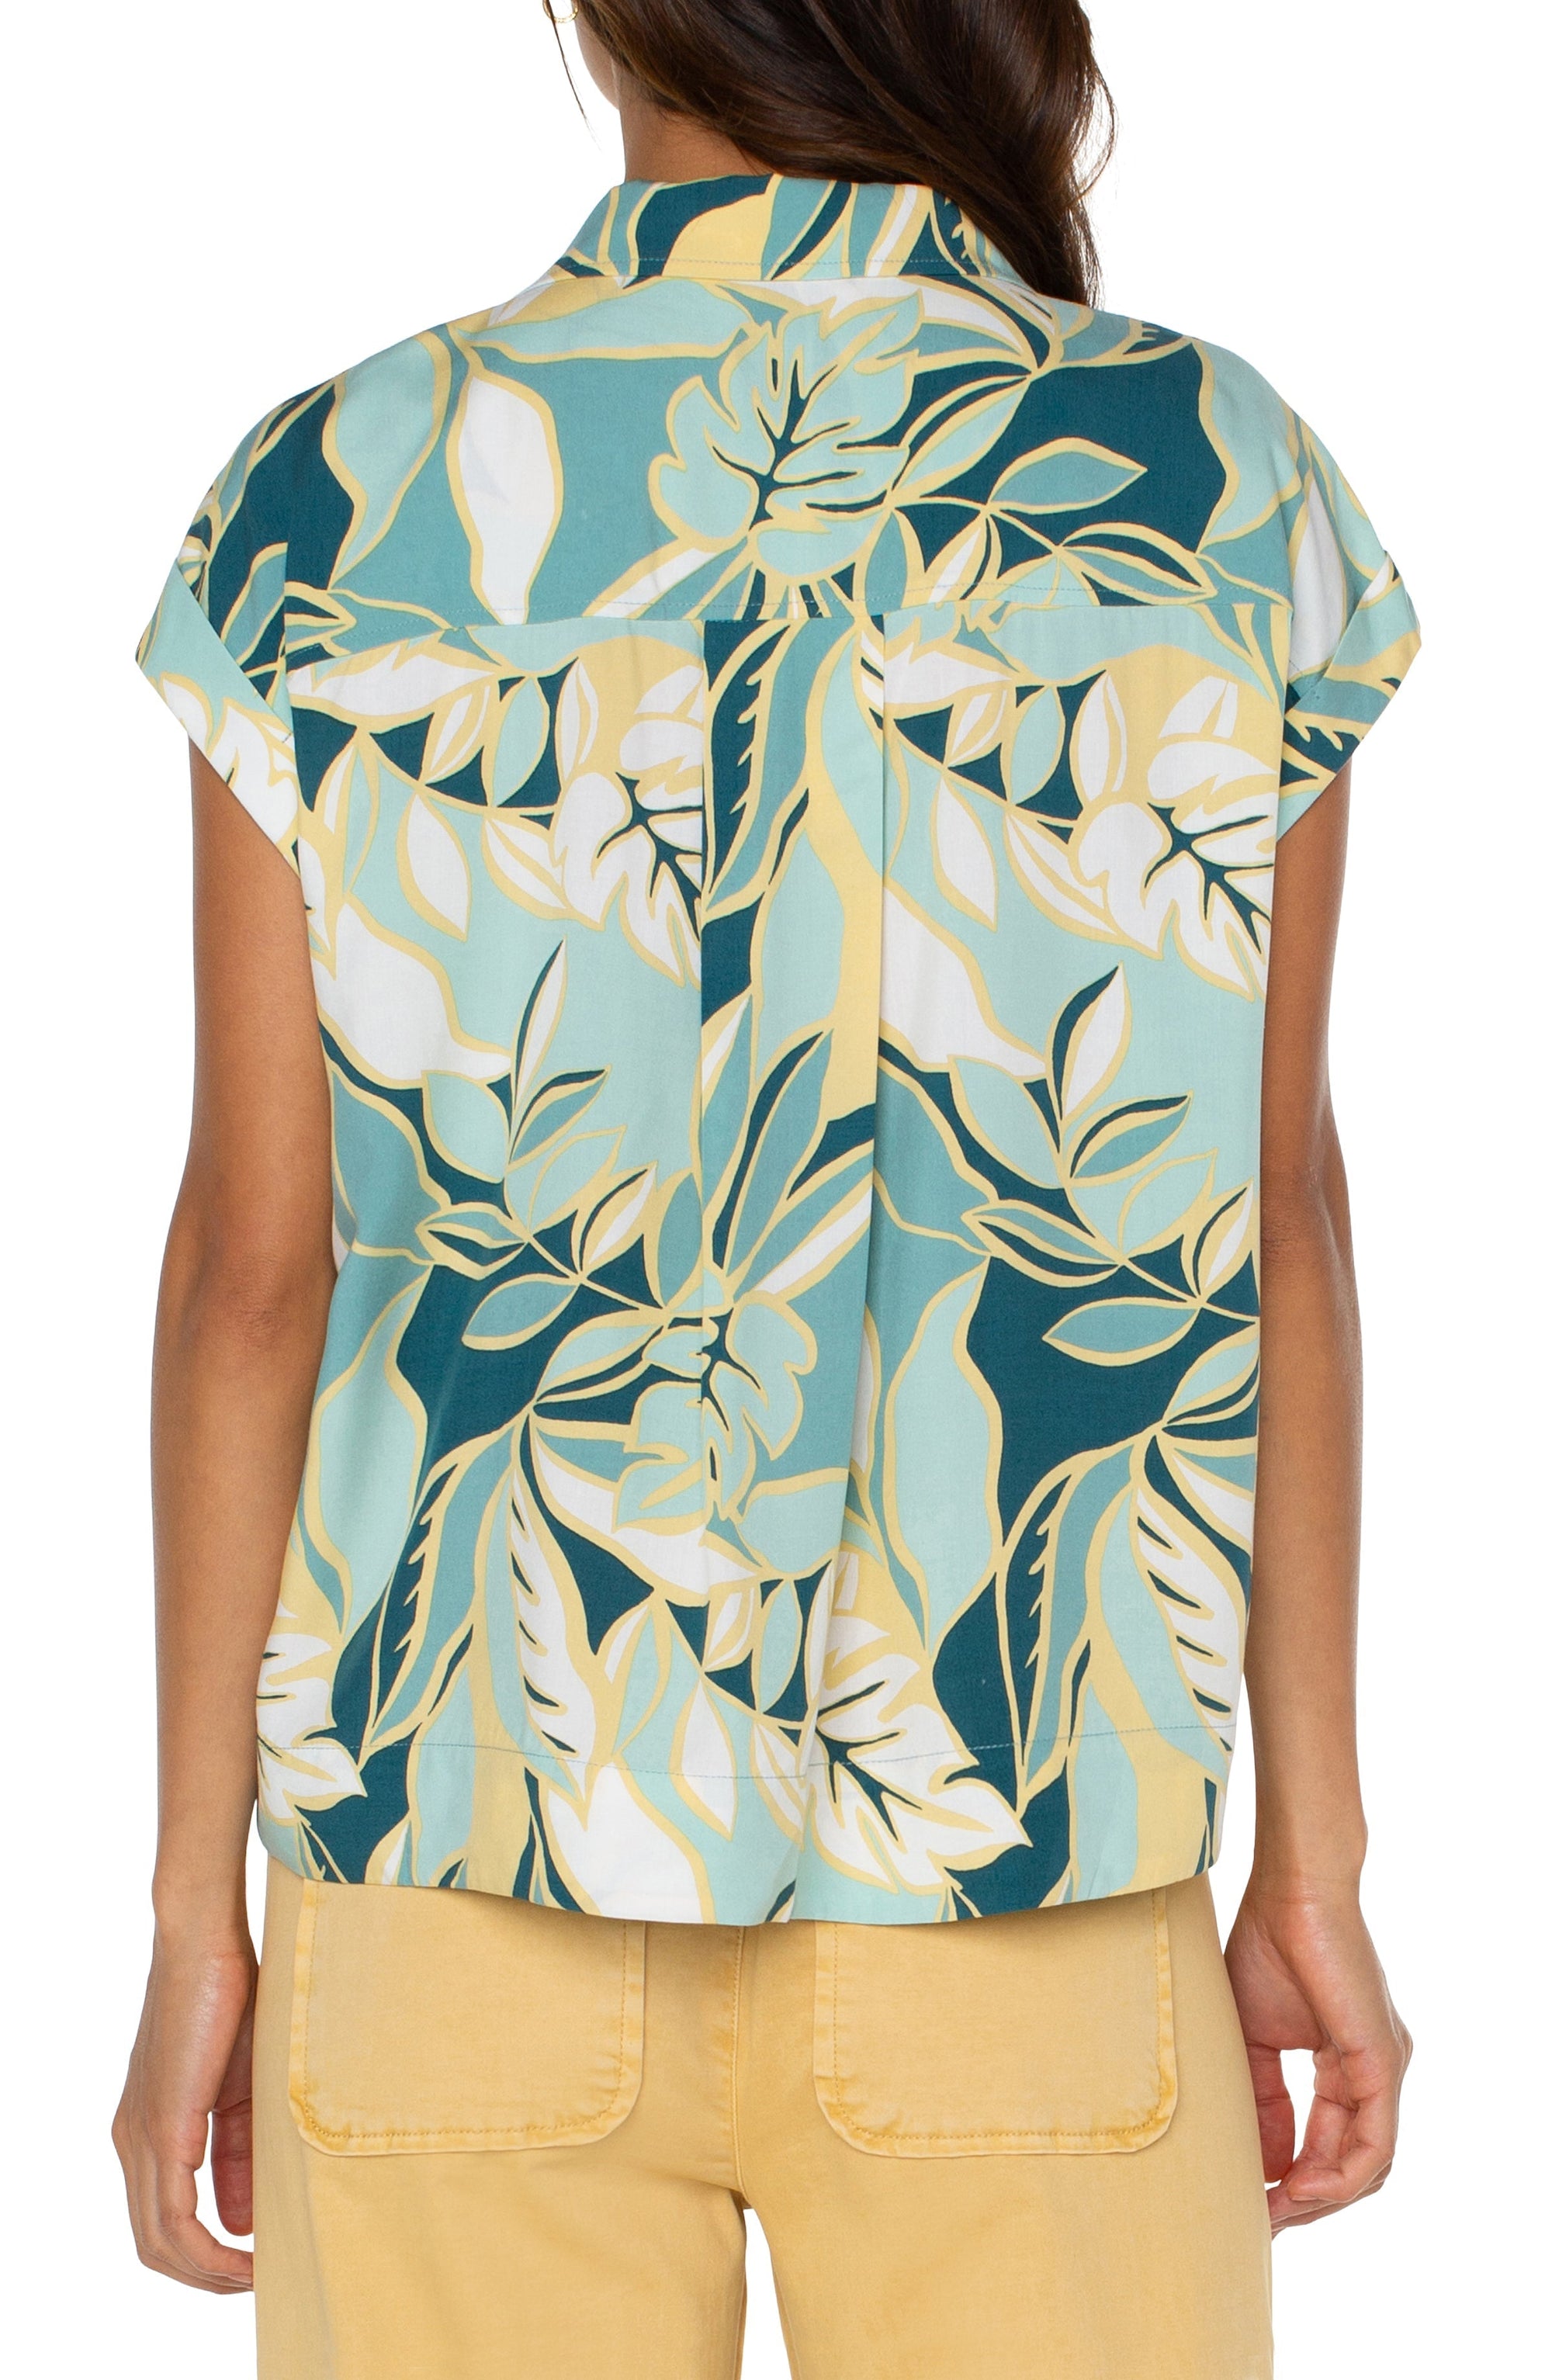 CROPPED DOLMAN CAMP SHIRT-Tops-LIVERPOOL-SMALL-TEAL TROPICAL-Coriander